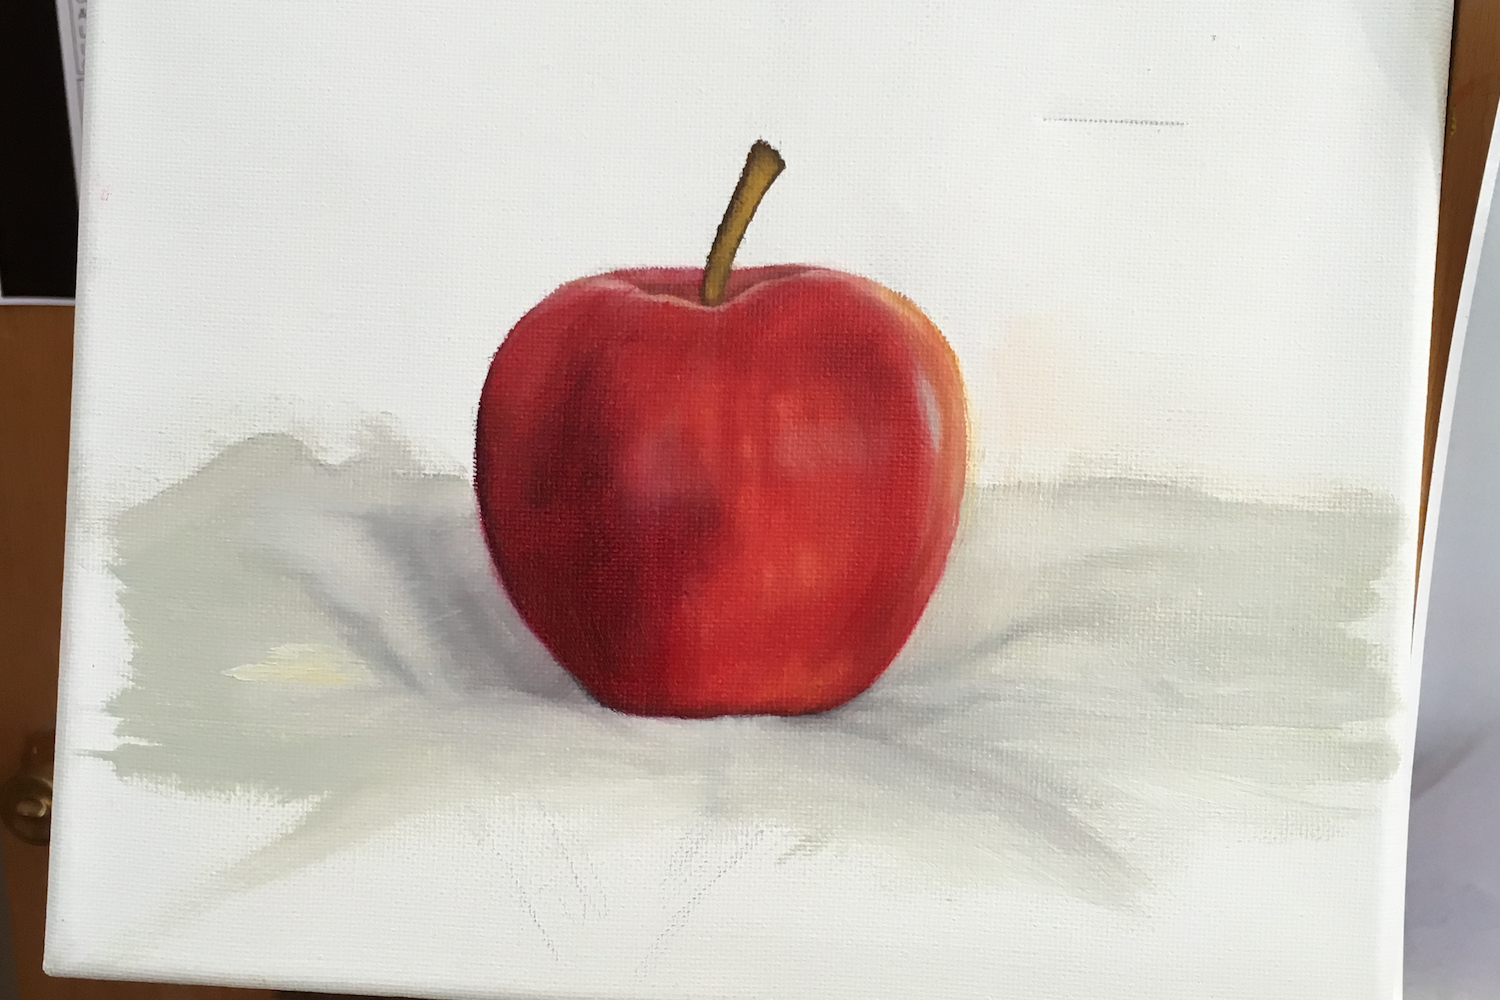 local-sketch-artist-and-oil-based-painter-for-hire-in-phoenix-az-apple-painting-on-eisel